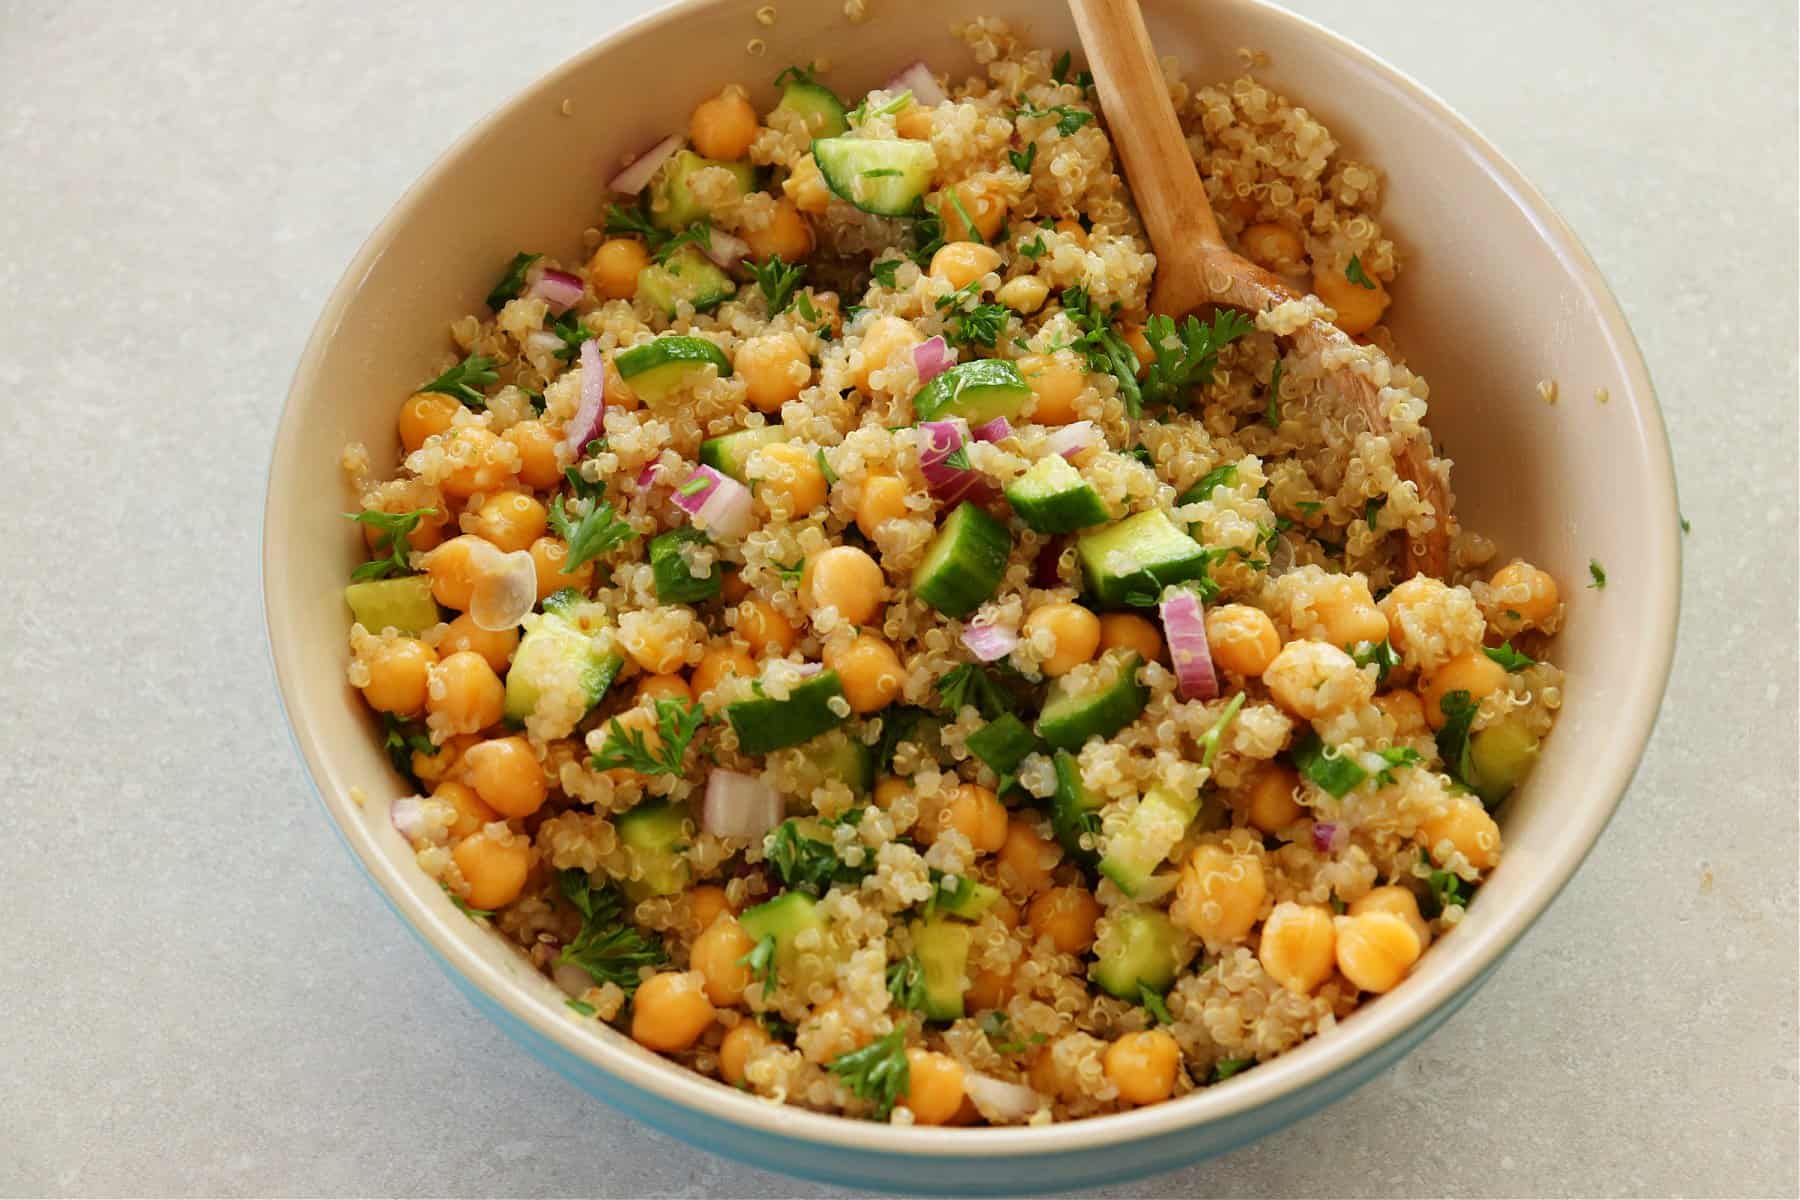 Salad with quinoa, chickpeas and cucumber in a mxing bowl.